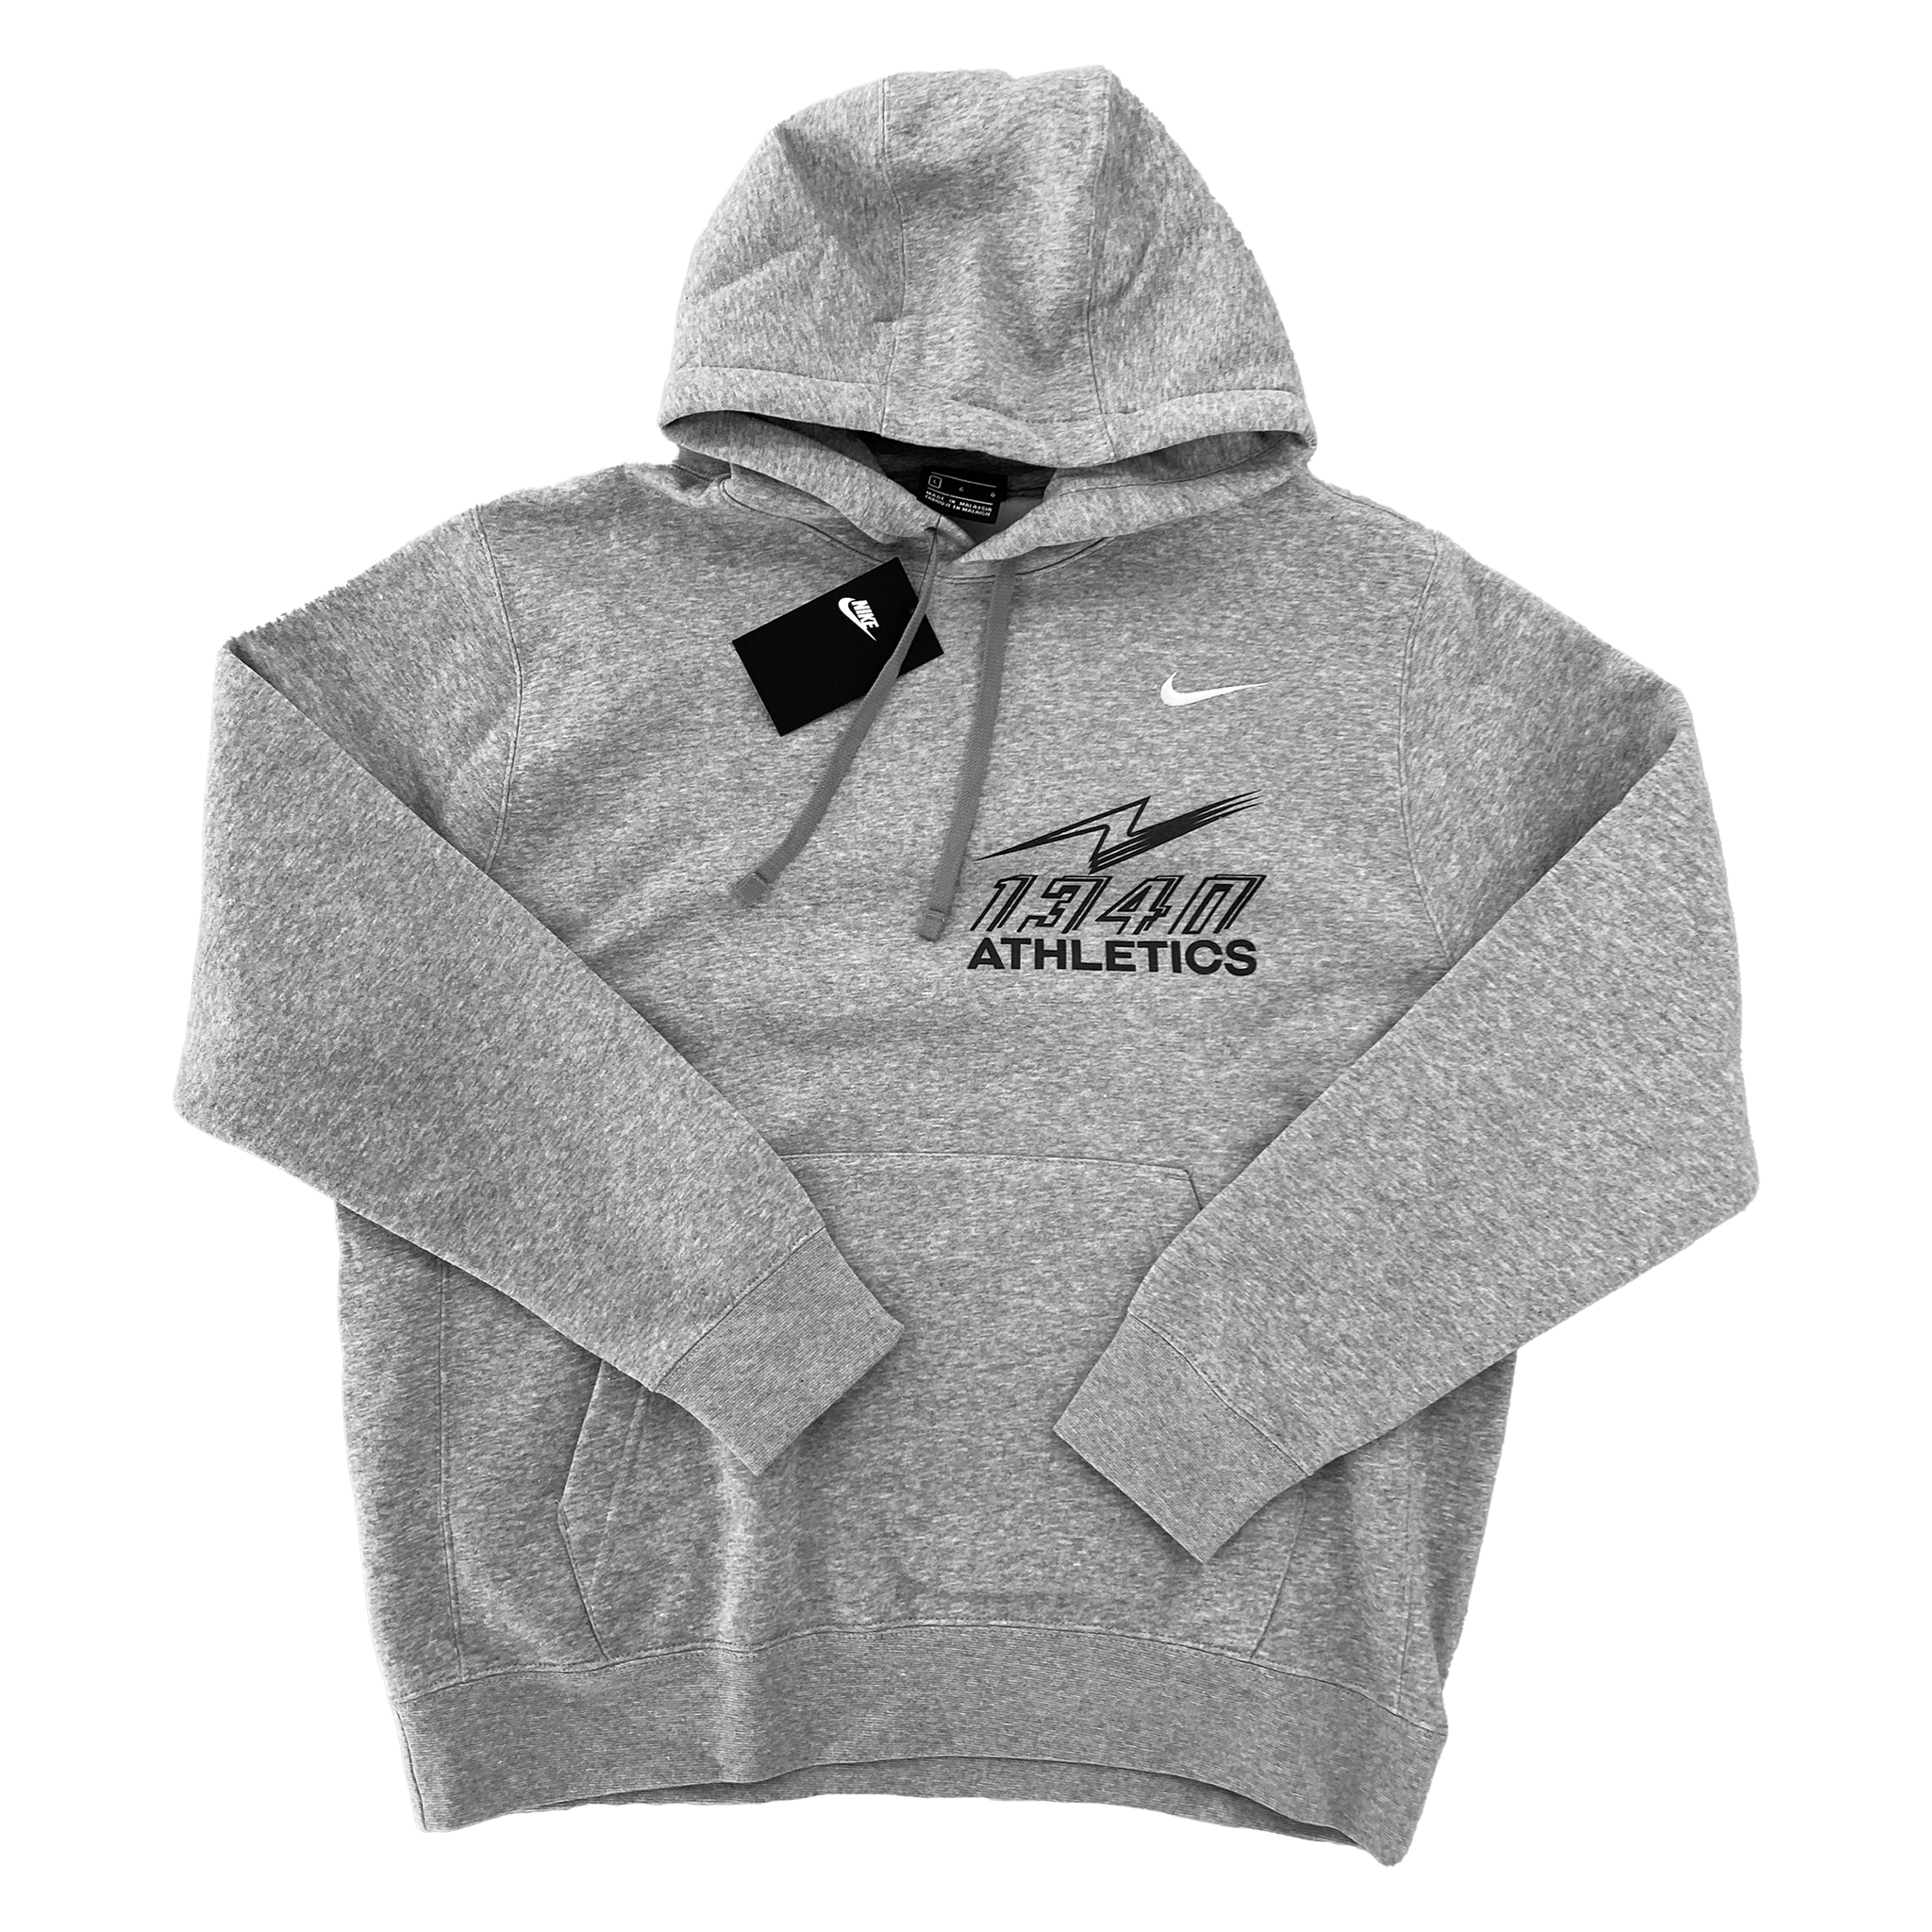 1340 CALL ME LUCKY - Nike HOODIE 1340 COLLECTIVE CO